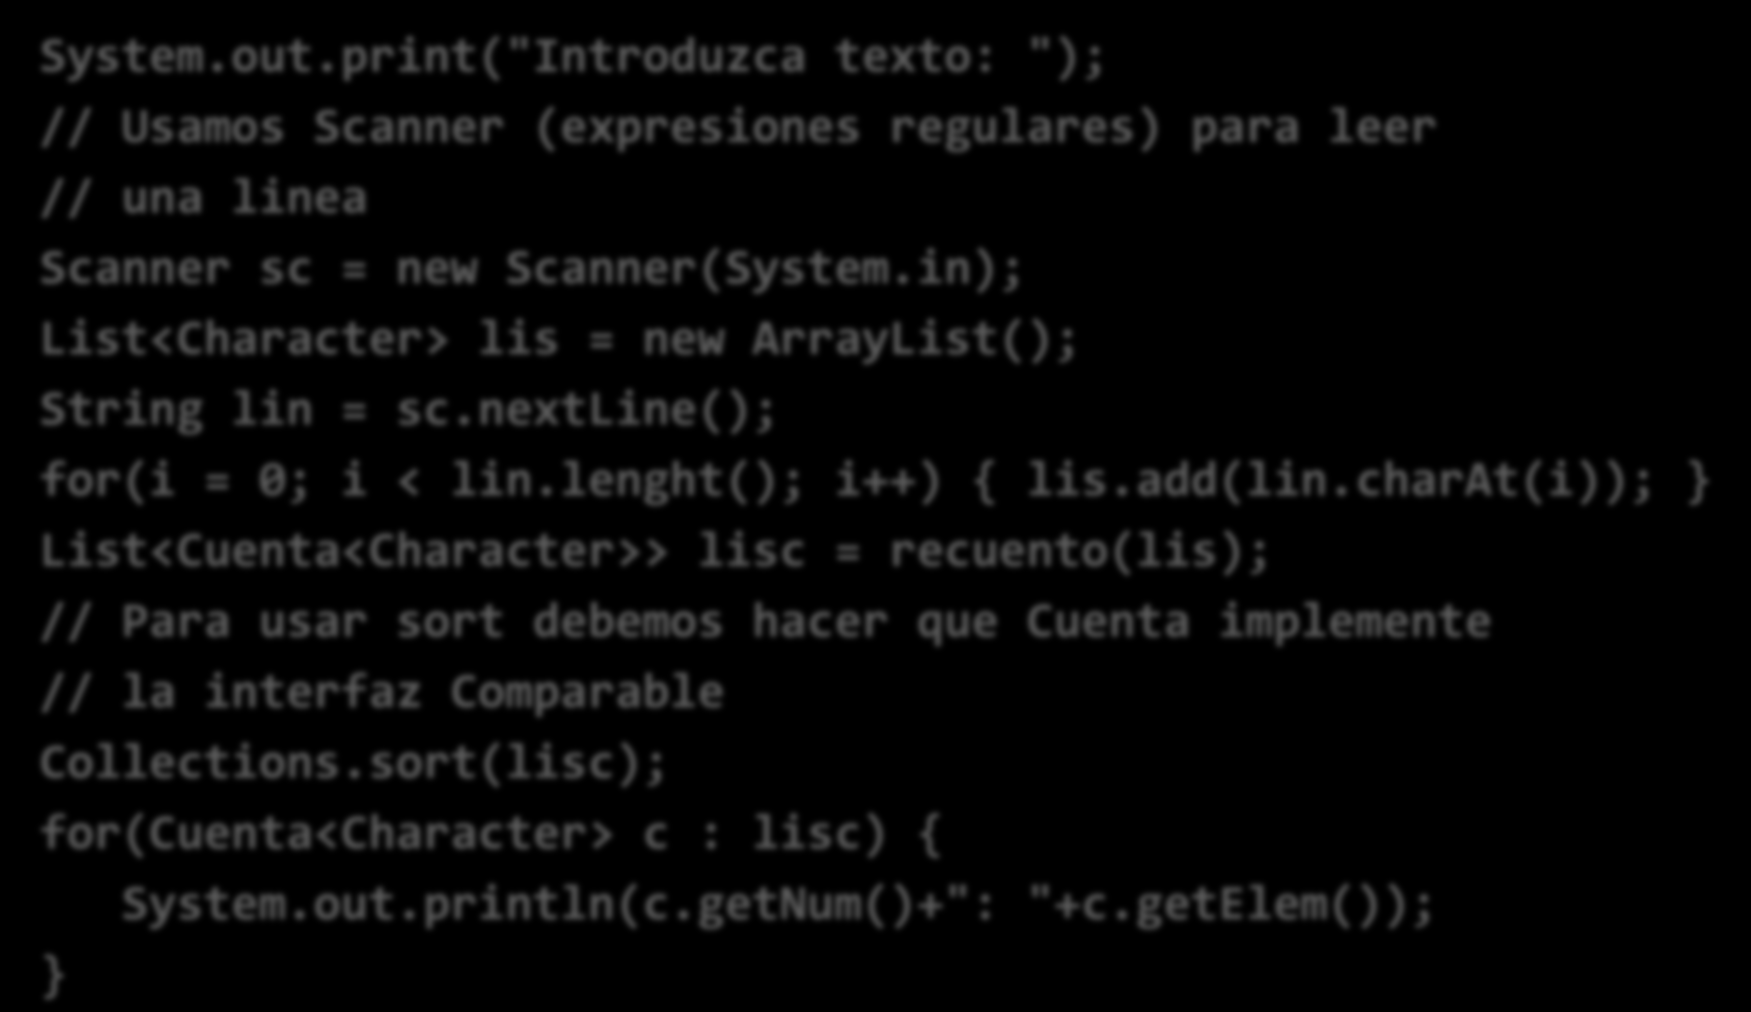 Algoritmo para caracteres System.out.print("Introduzca texto: "); // Usamos Scanner (expresiones regulares) para leer // una linea Scanner sc = new Scanner(System.